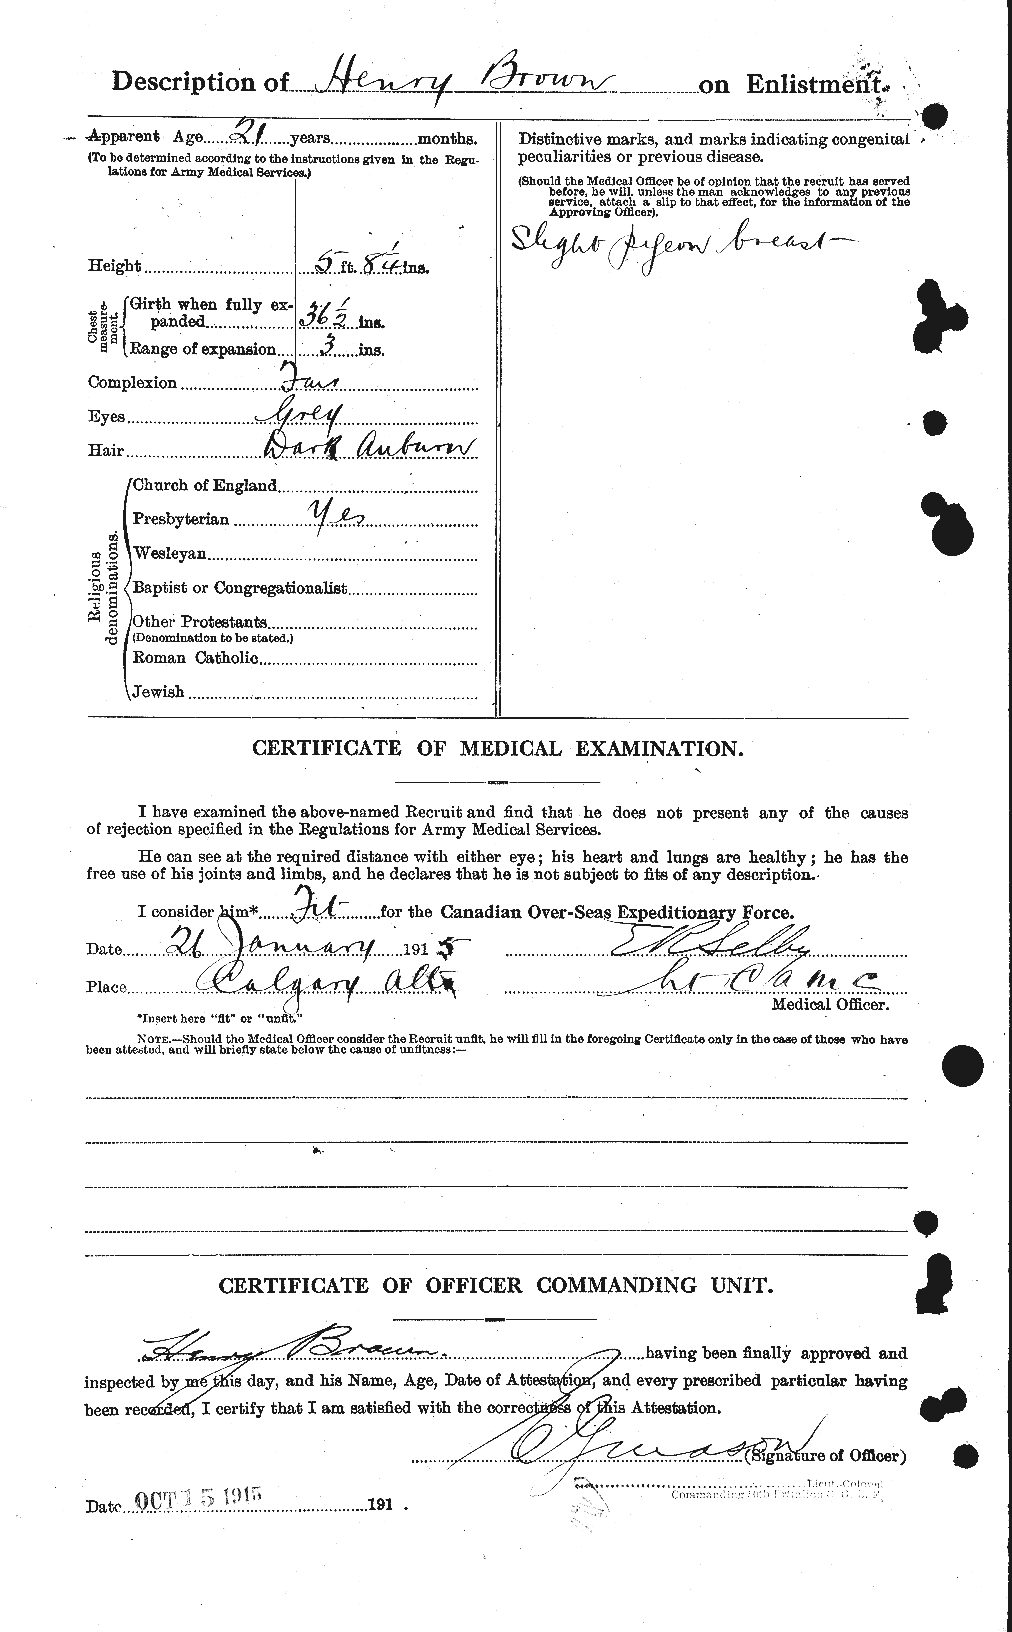 Personnel Records of the First World War - CEF 265516b